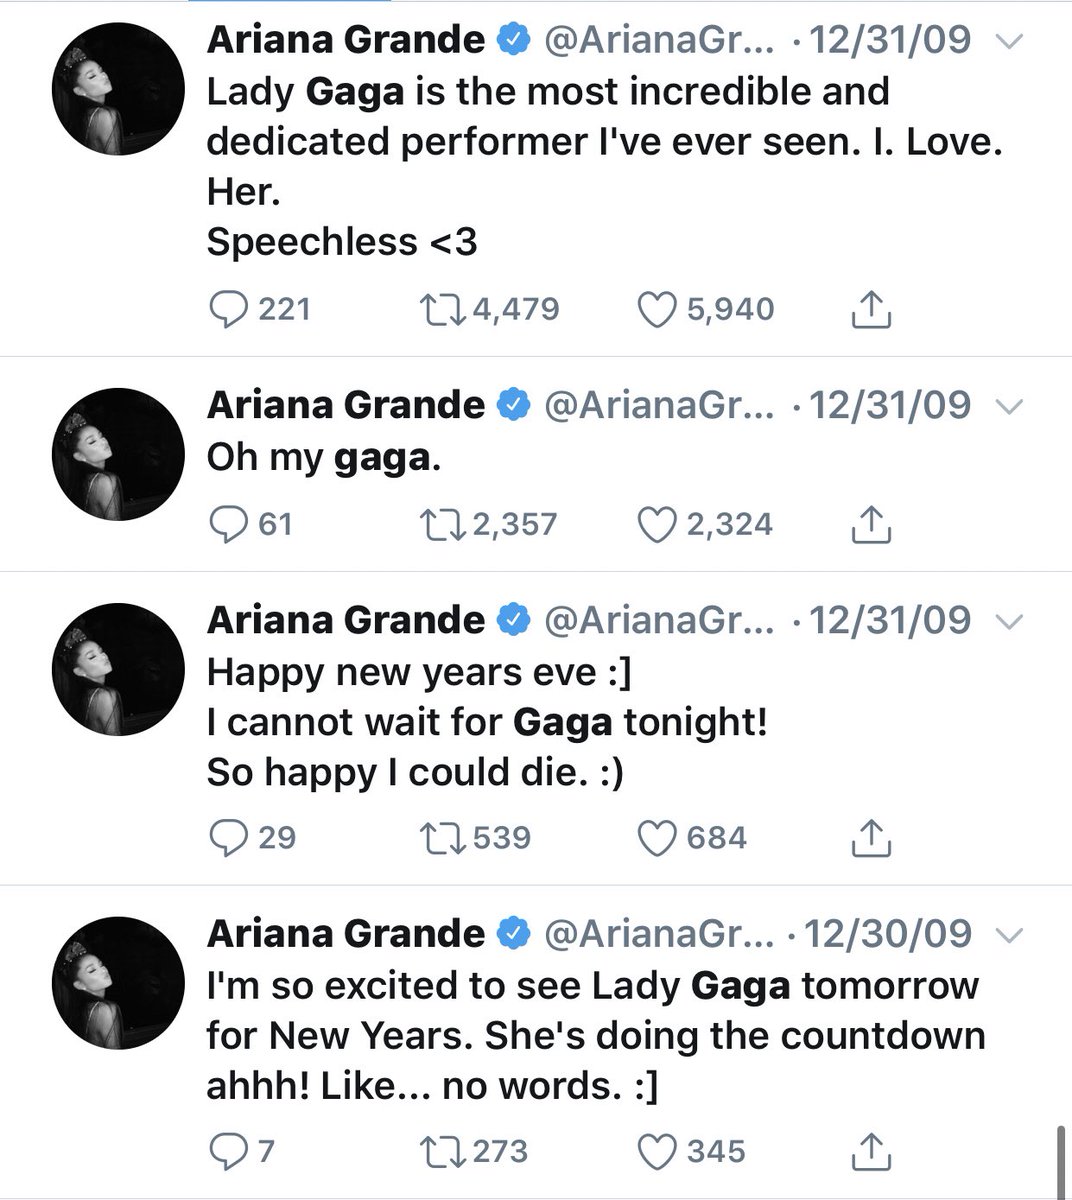 Ariana was clearly very excited to watch Gaga perform on New Years Eve in 2009 and called her the most “incredible and dedicated performer” she’s ever seen.